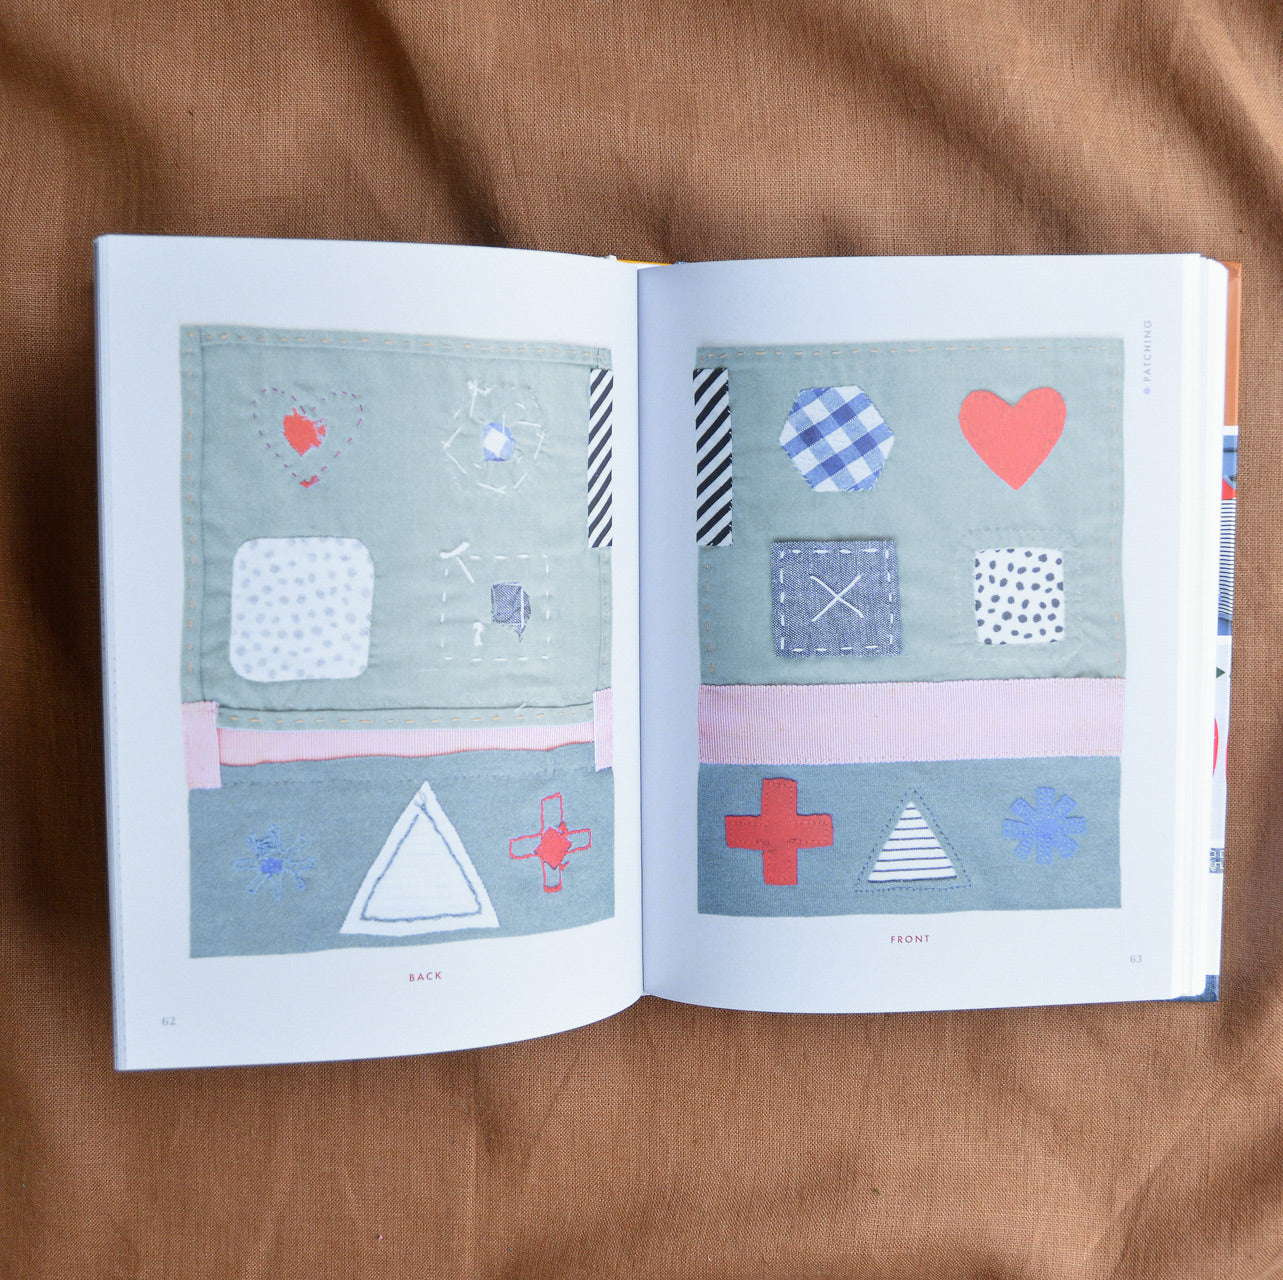 "Modern Mending" Hardcover Book by Erin Lewis-Fitzgerald